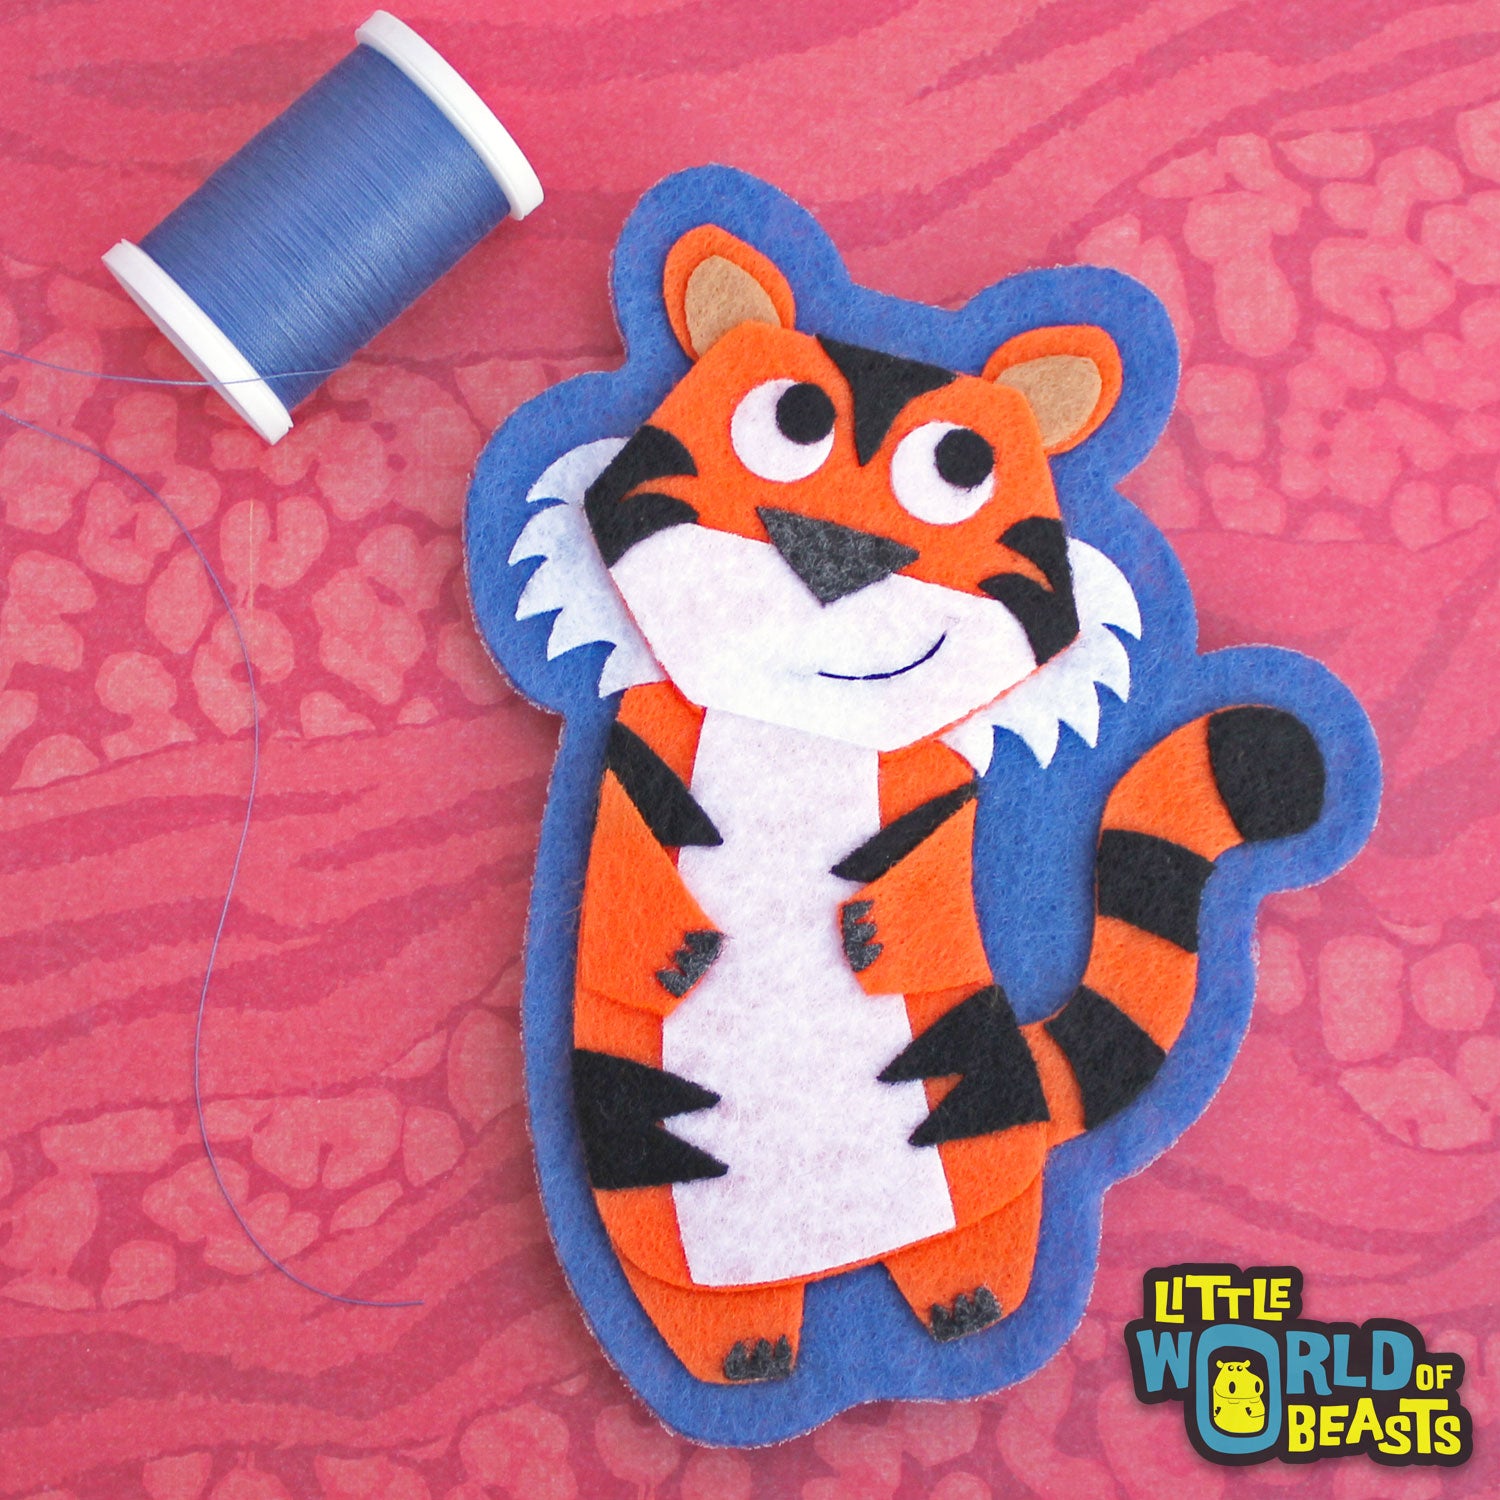 Kiki the Tiger - Sew On or Iron on Felt Animal Patch  - Little World of Beasts